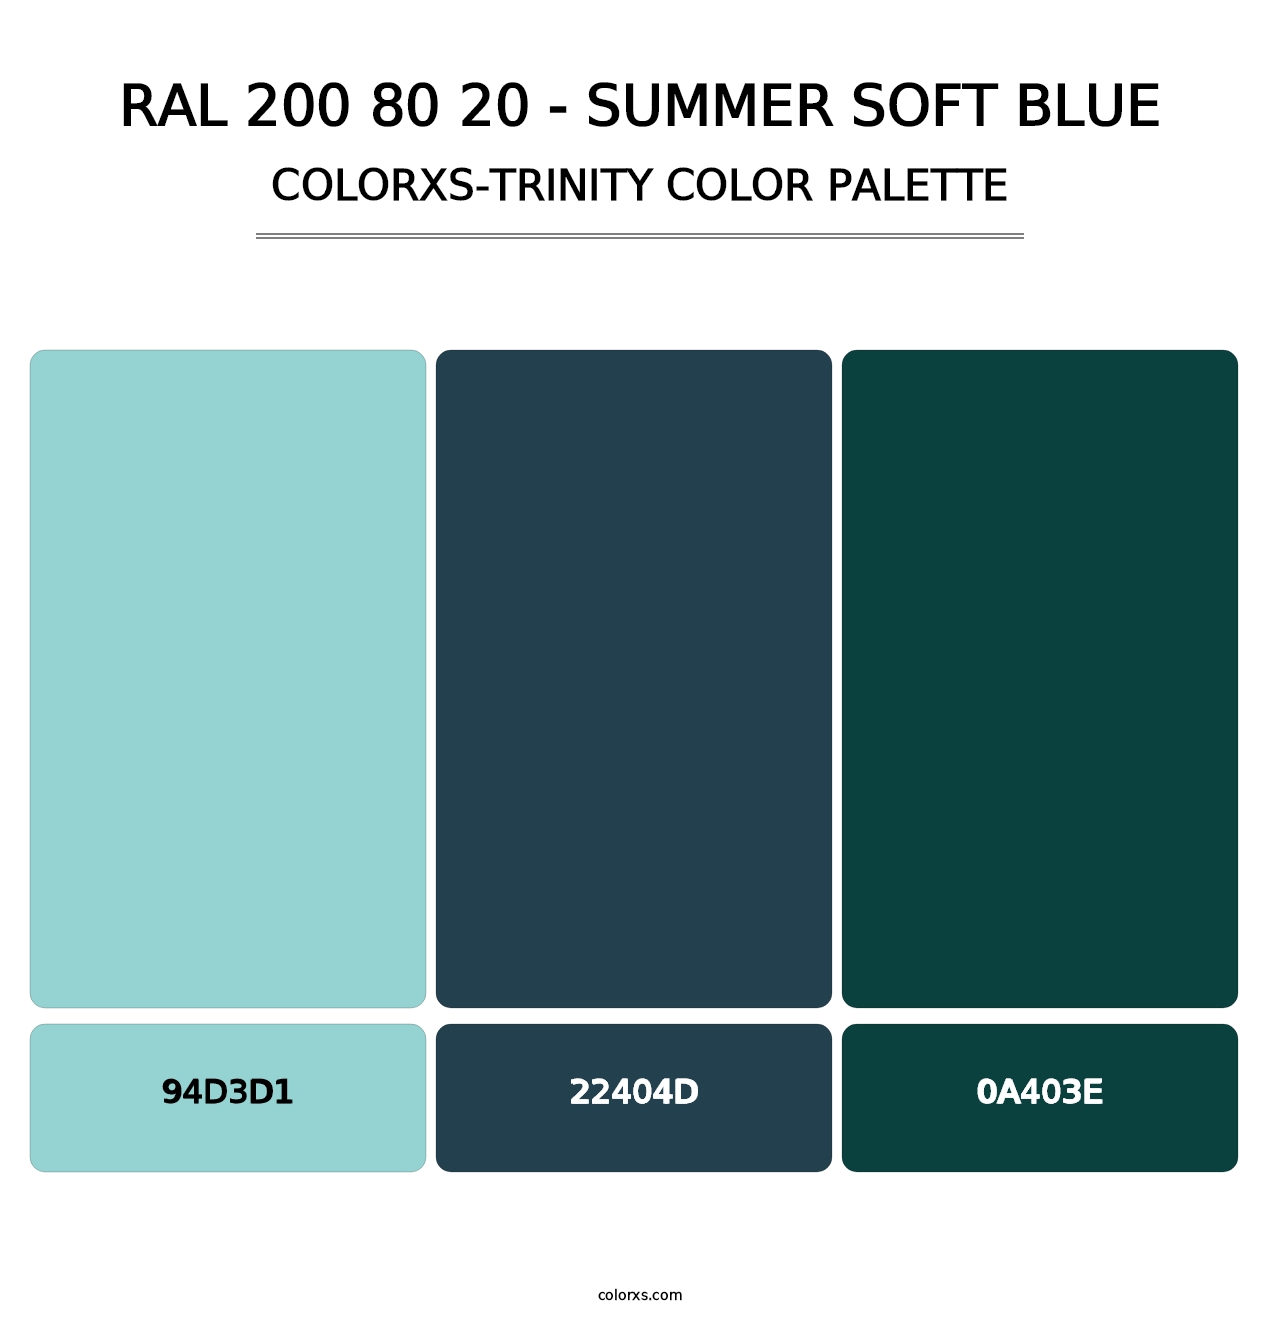 RAL 200 80 20 - Summer Soft Blue - Colorxs Trinity Palette